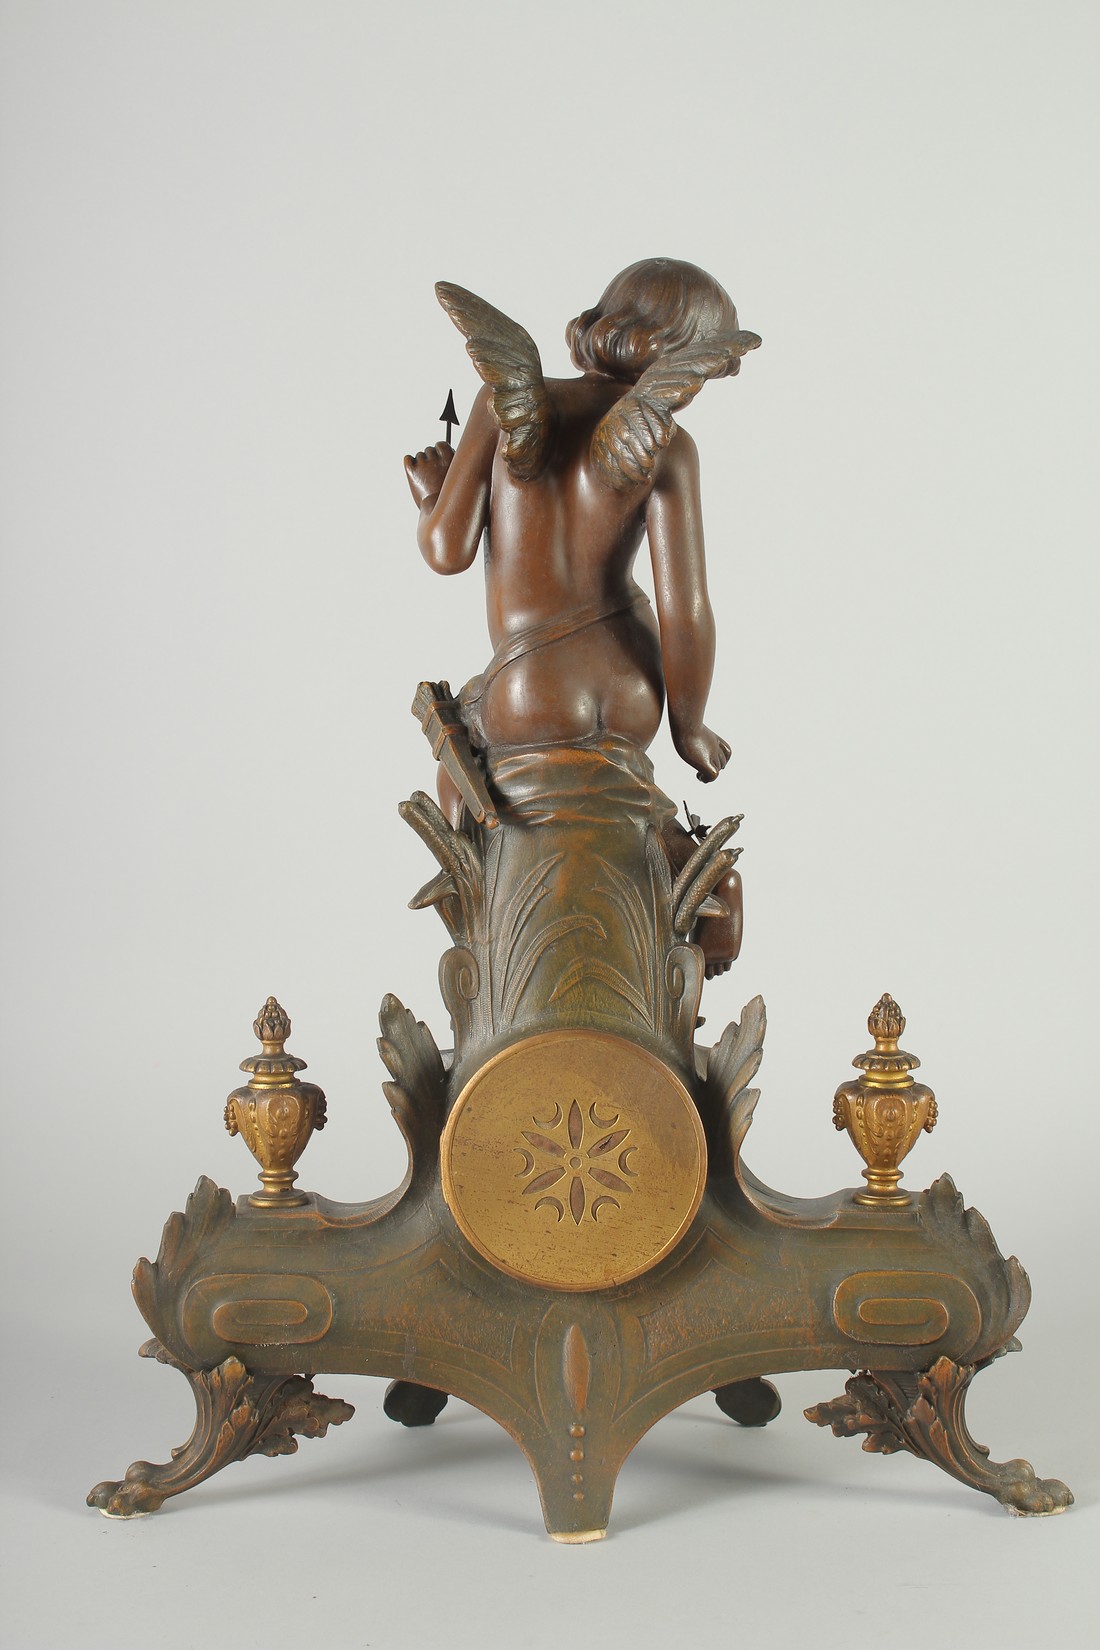 A 19TH CENTURY FRENCH SPELTER FIGURAL MANTLE CLOCK with eight day movement, floral painted porcelain - Image 3 of 5